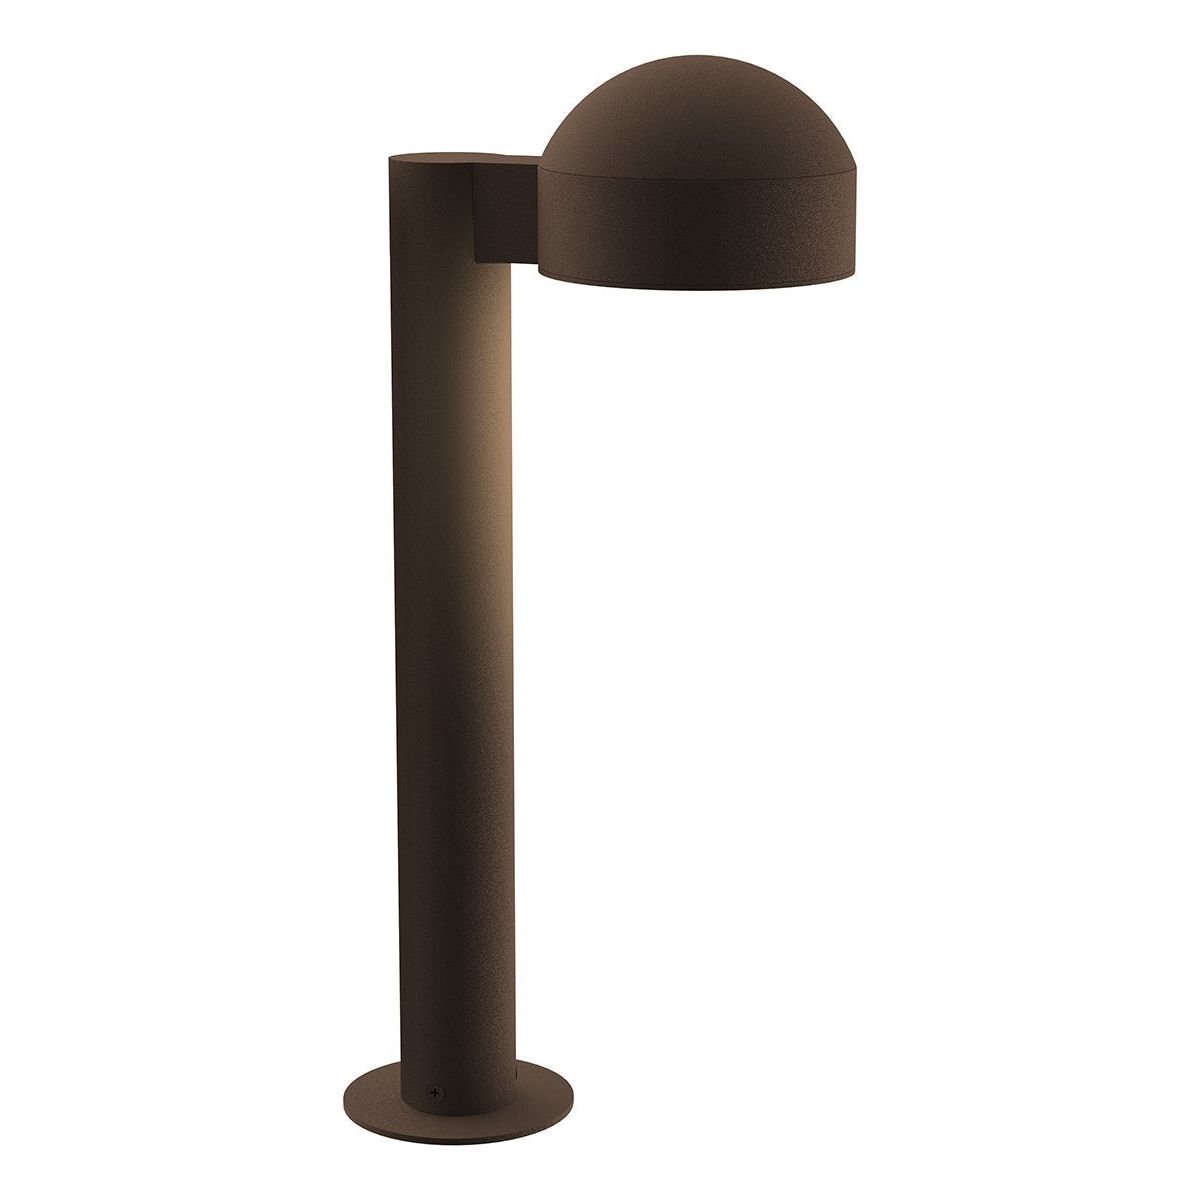 REALS 16" LED Bollard with Dome Cap and Plate Lens